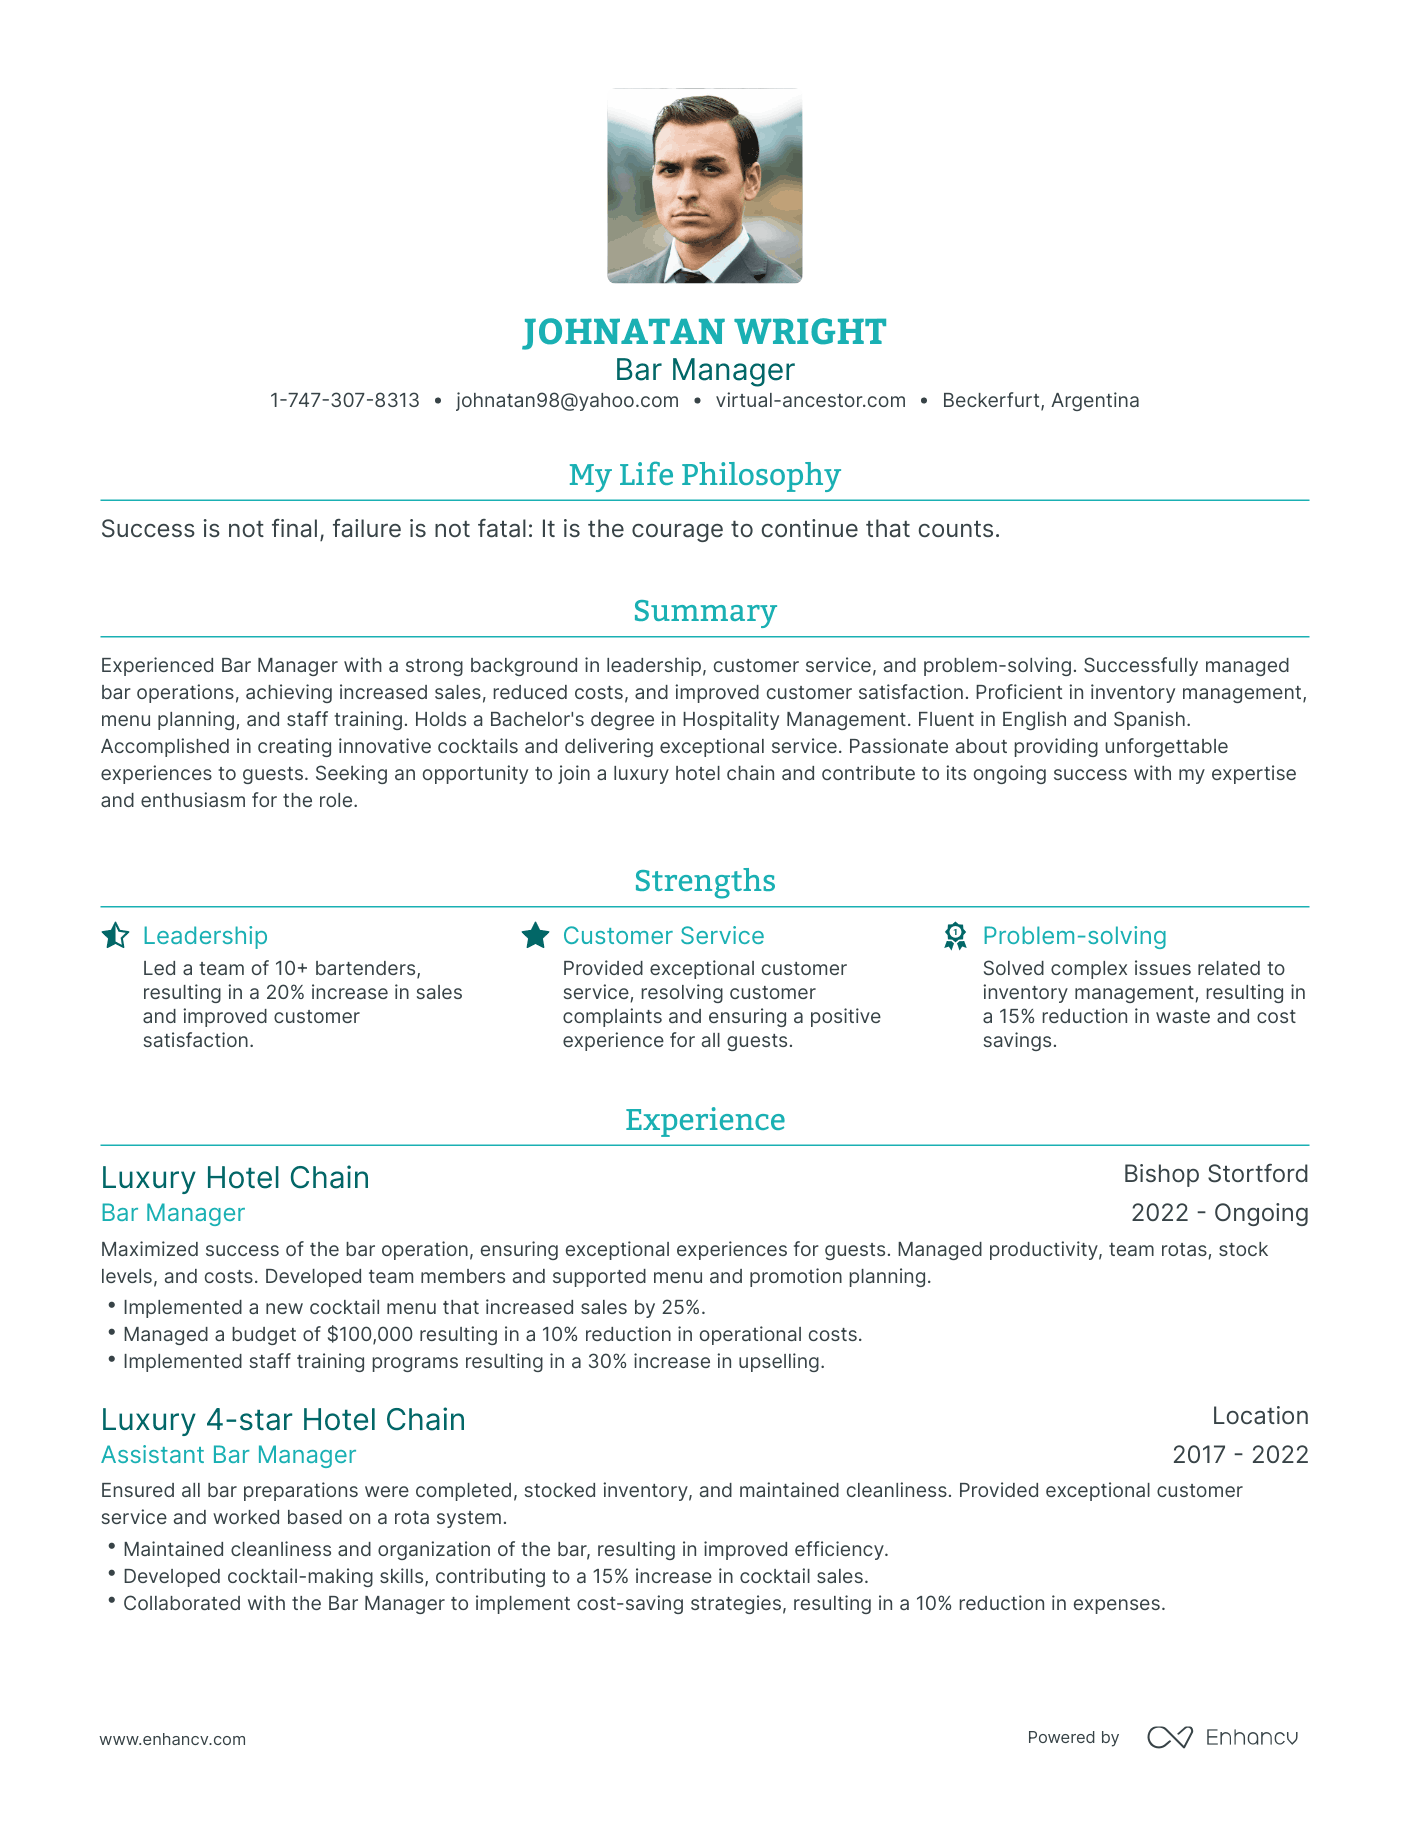 Modern Bar Manager Resume Example